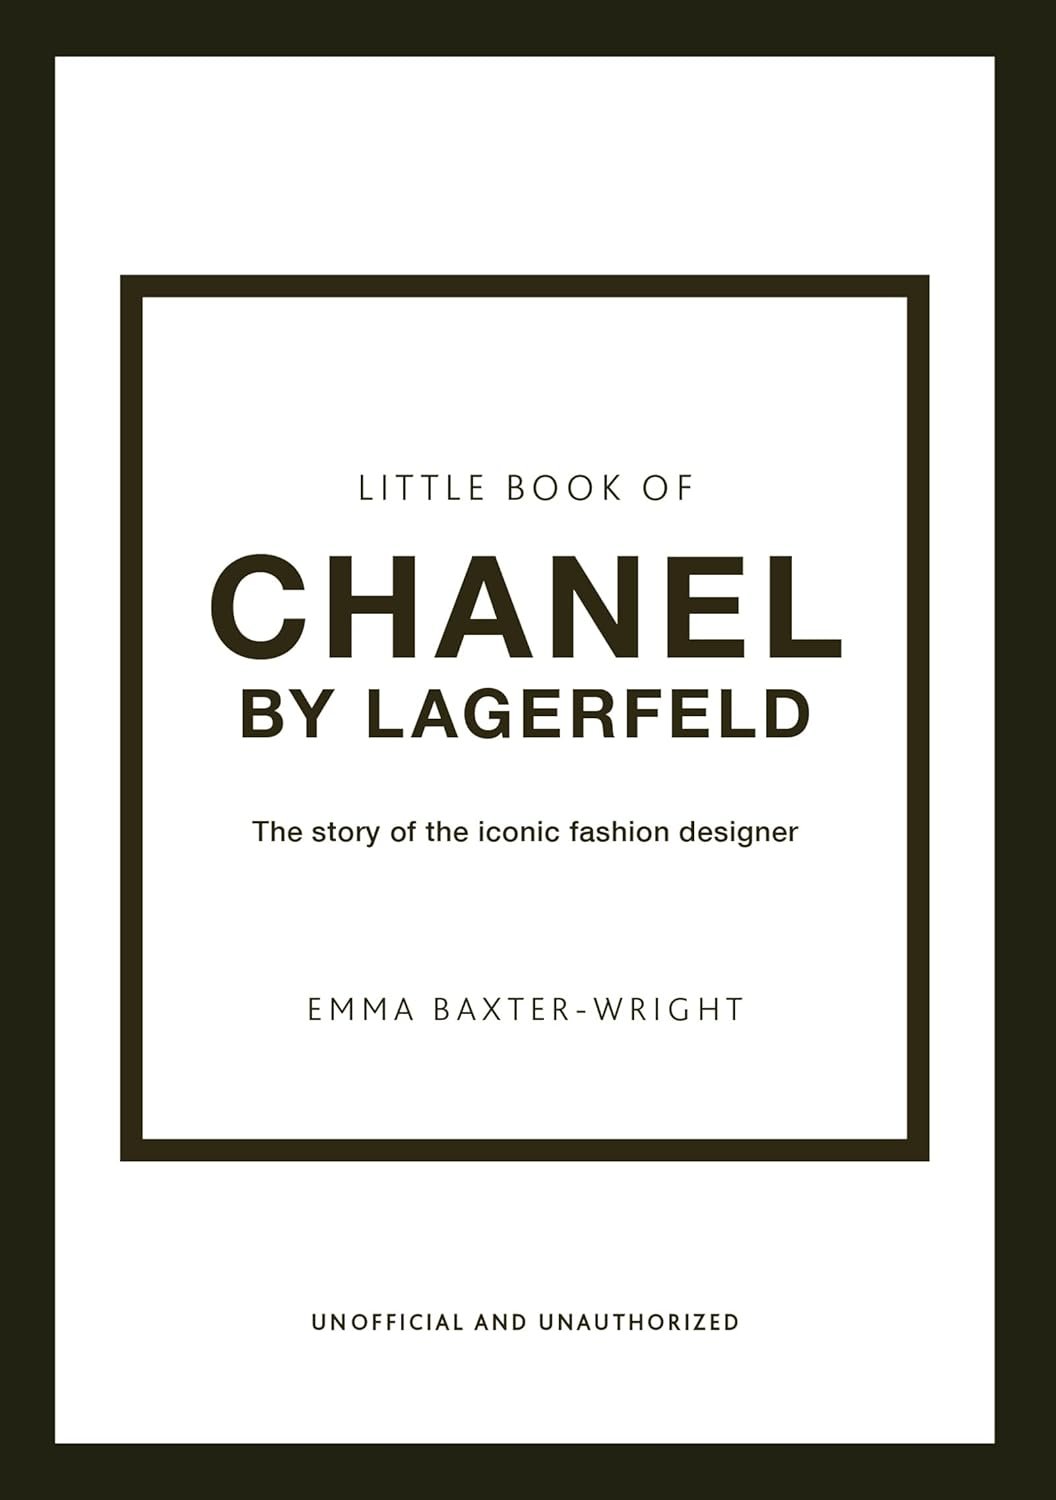 The Little Book of Chanel by Lagerfeld: The Story of the Iconic Fashion Designer (Little Books of Fashion, 15)